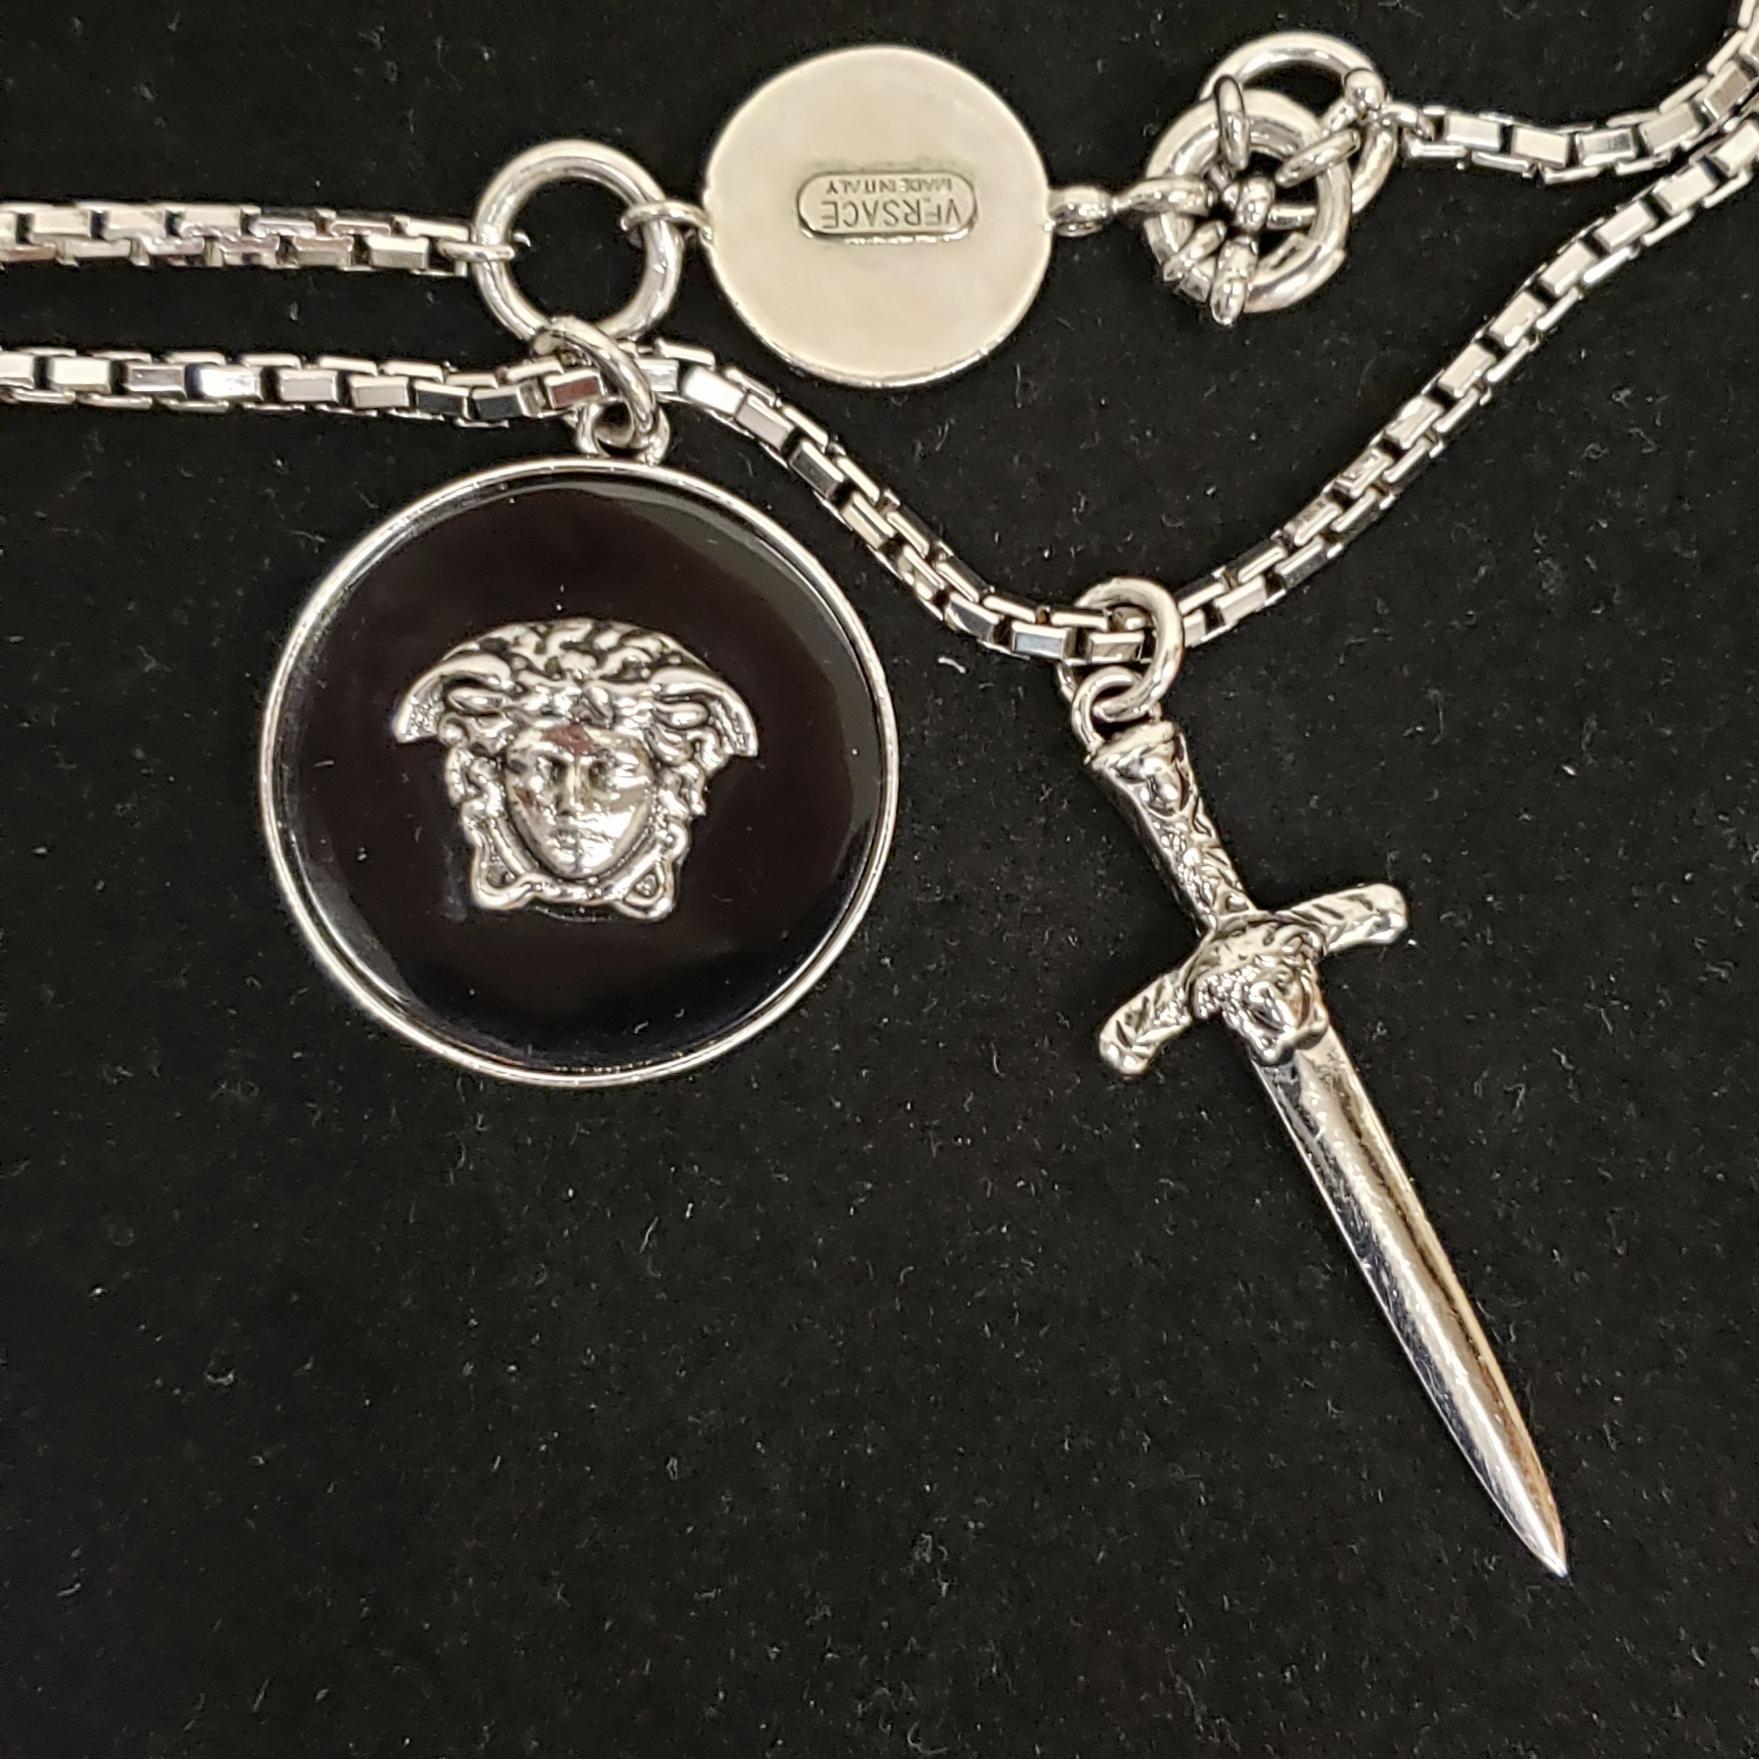   VERSACE
Actual PR-Sample Spring 2011 

     Silver tone Medusa and Dagger Necklace

Made in Italy



Necklace full length 13 1/2